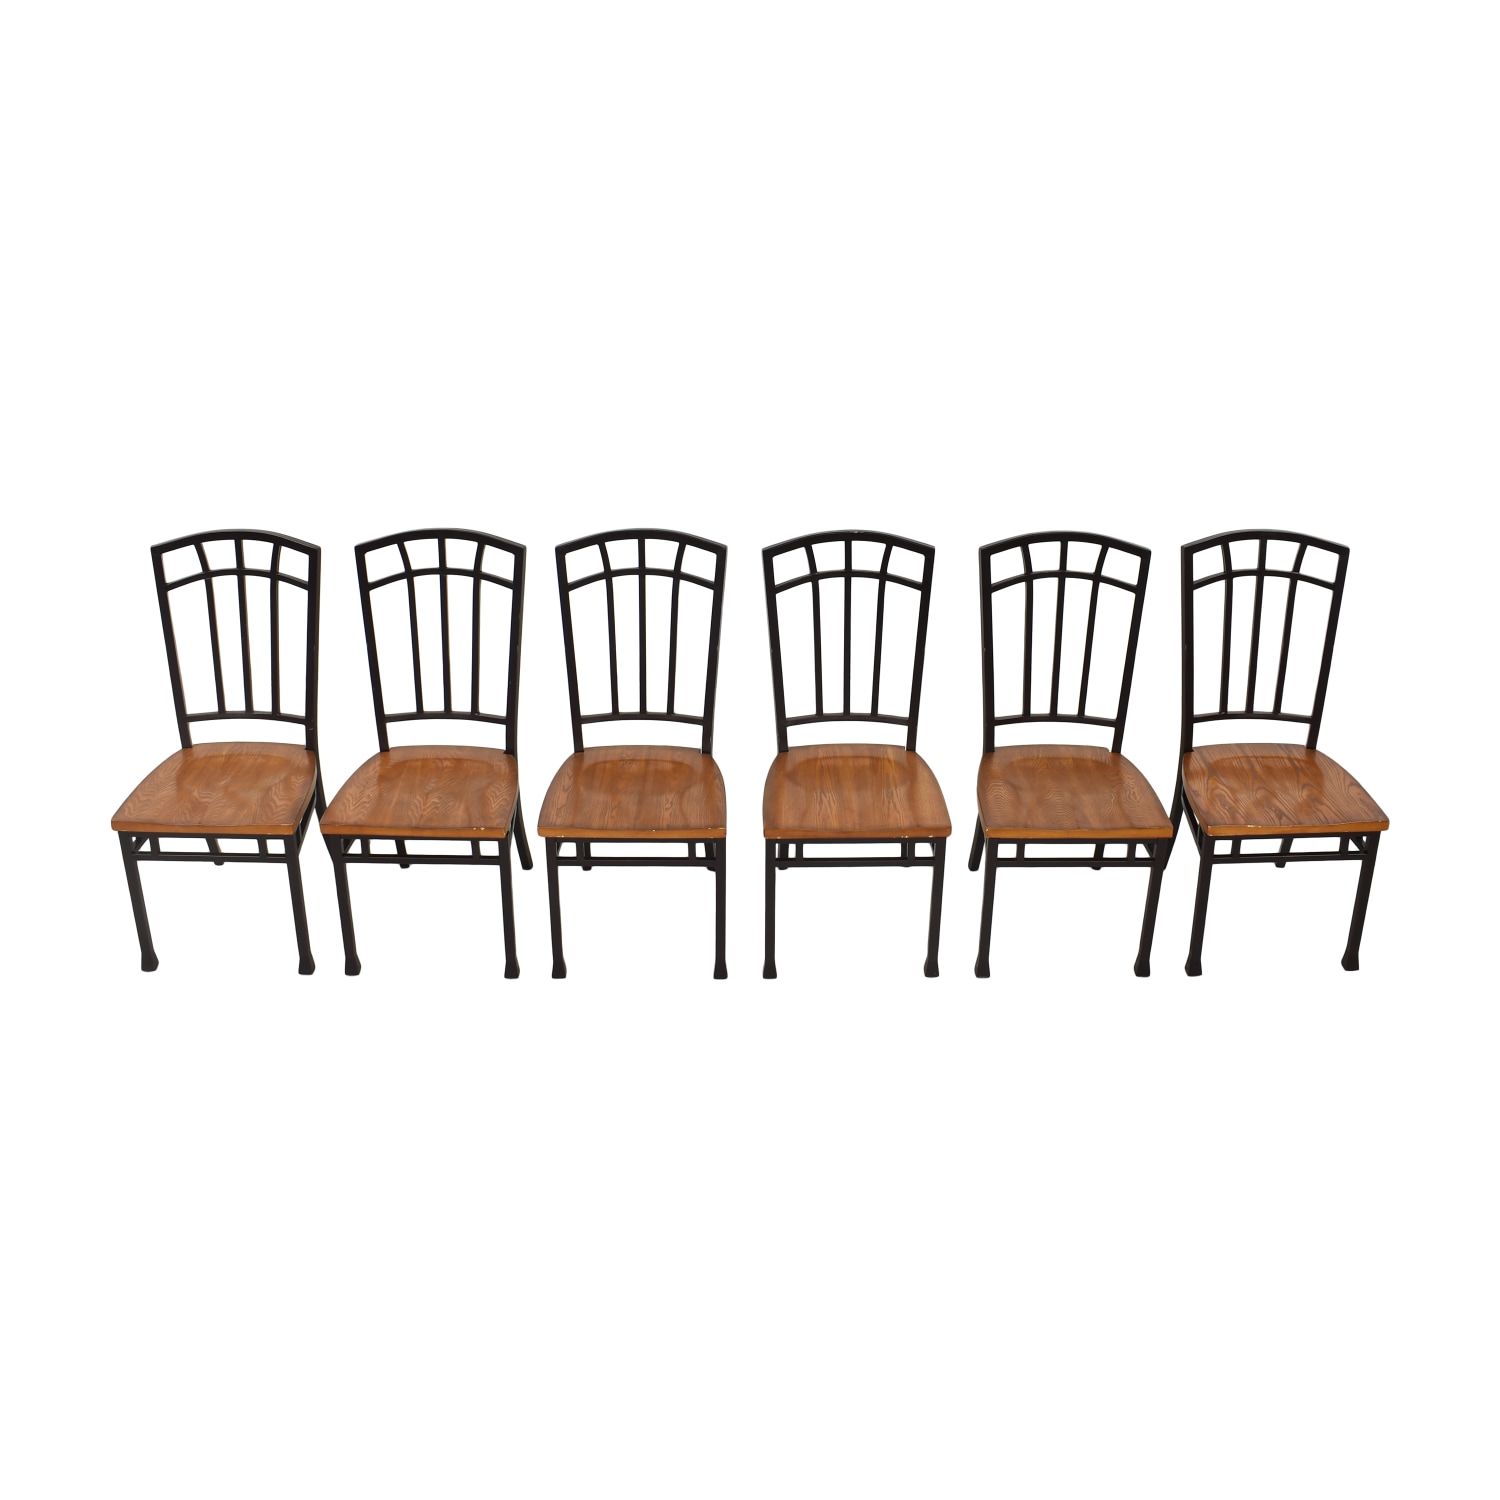 Platypus Modern High Back Dining Side Chairs  ma